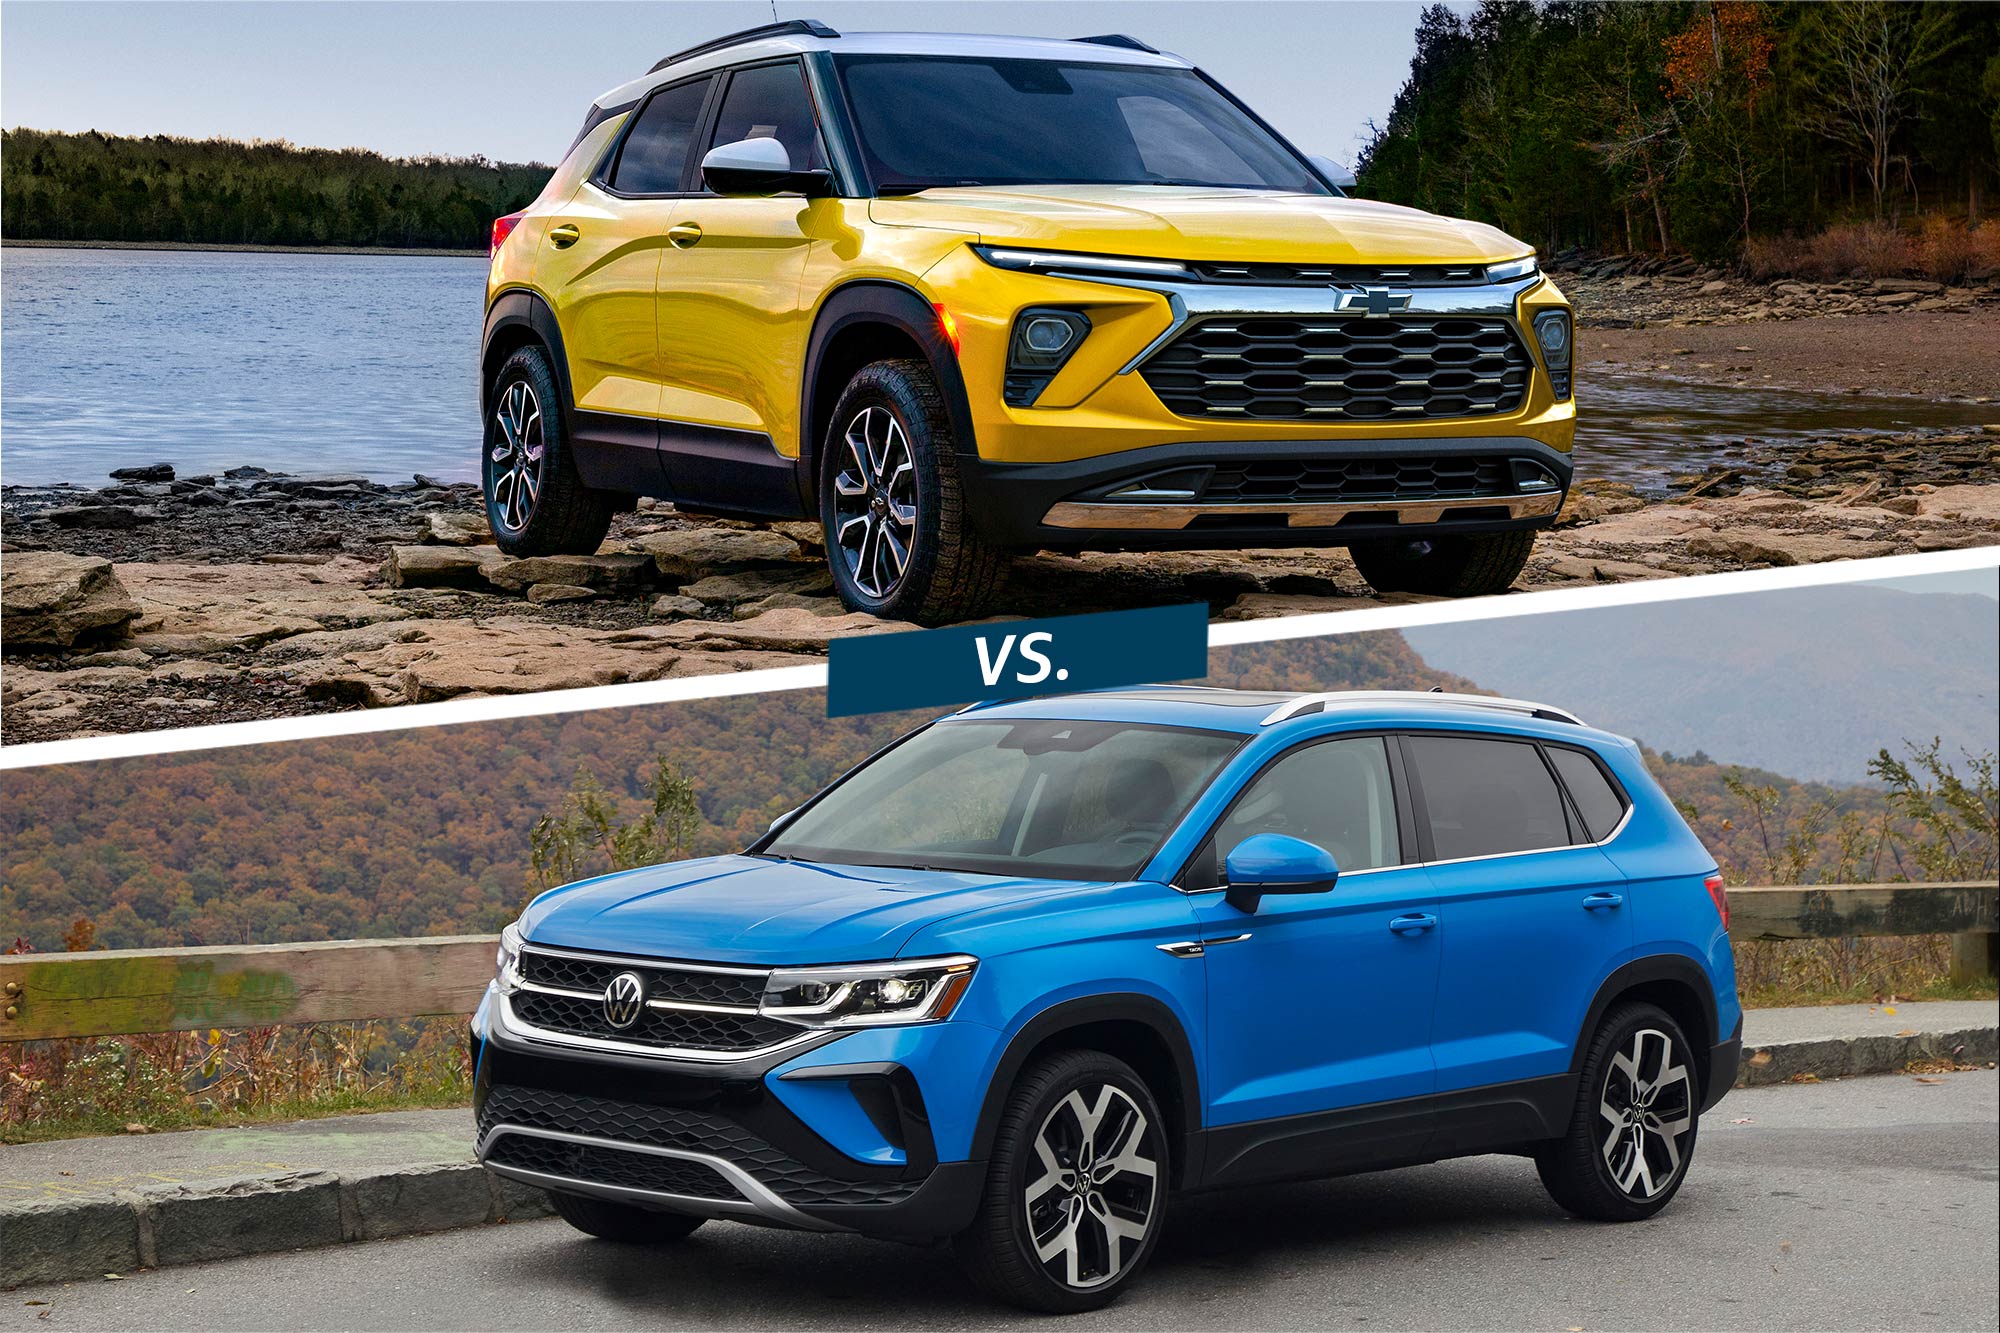 The front of a yellow 2024 Chevrolet Trailblazer and a blue 2024 Volkswagen Taos